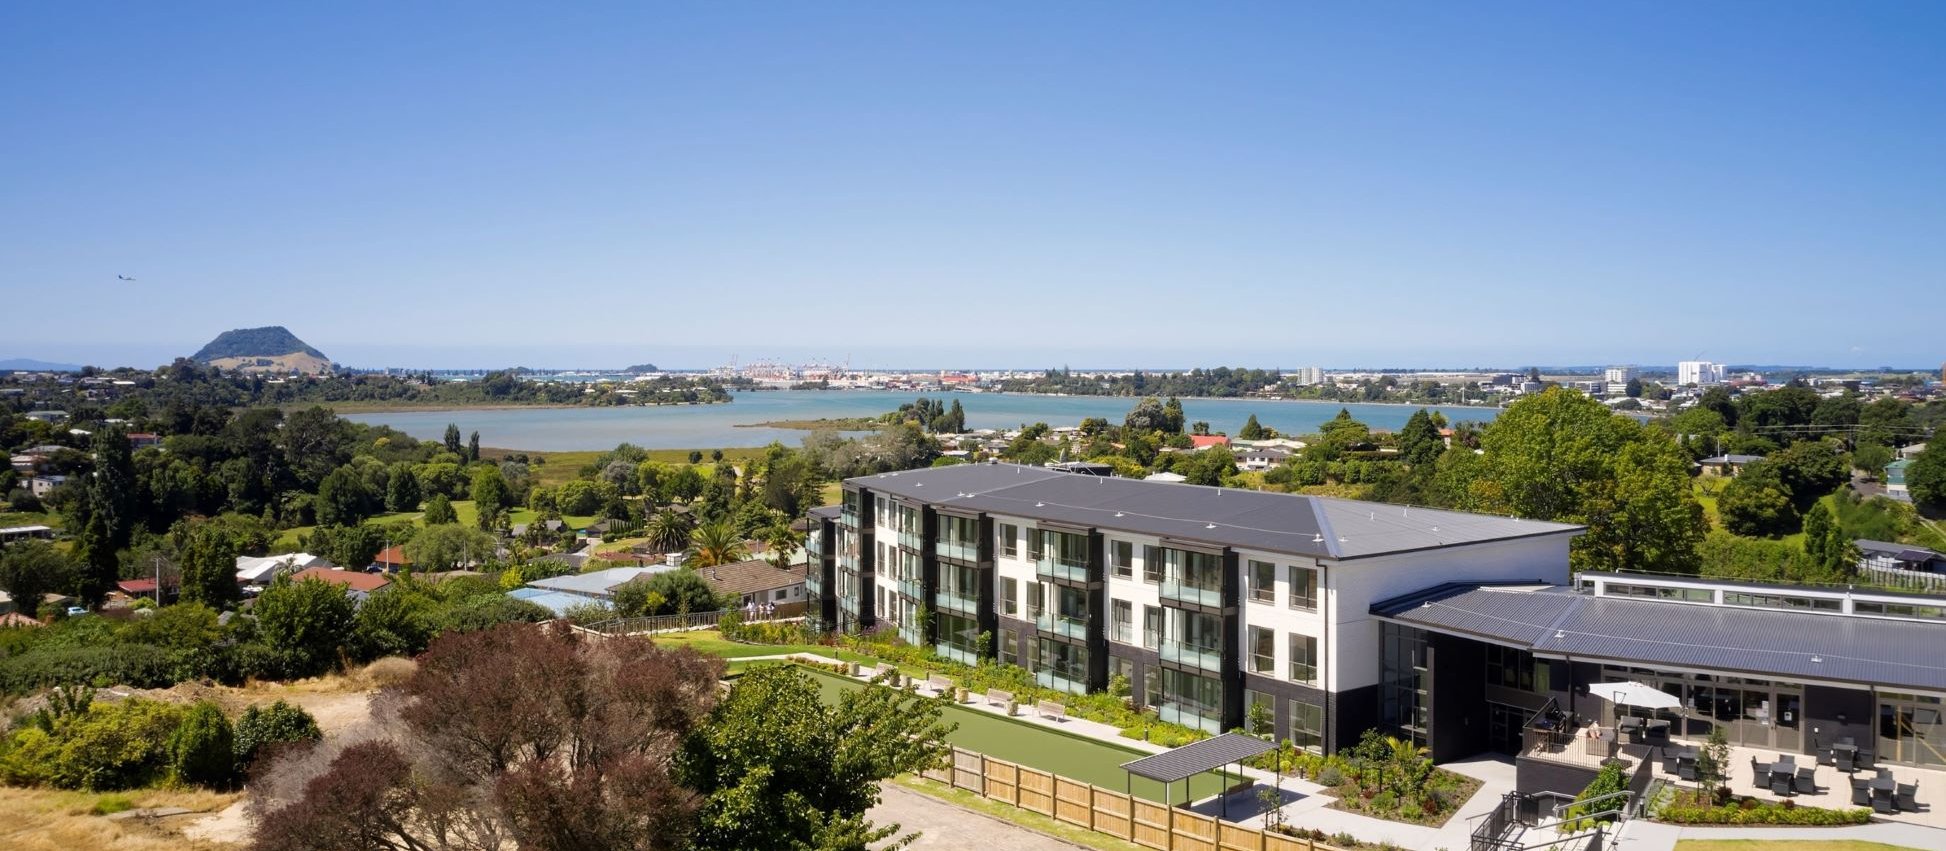 The Bayview Apartments overlooking Mount Maunganui